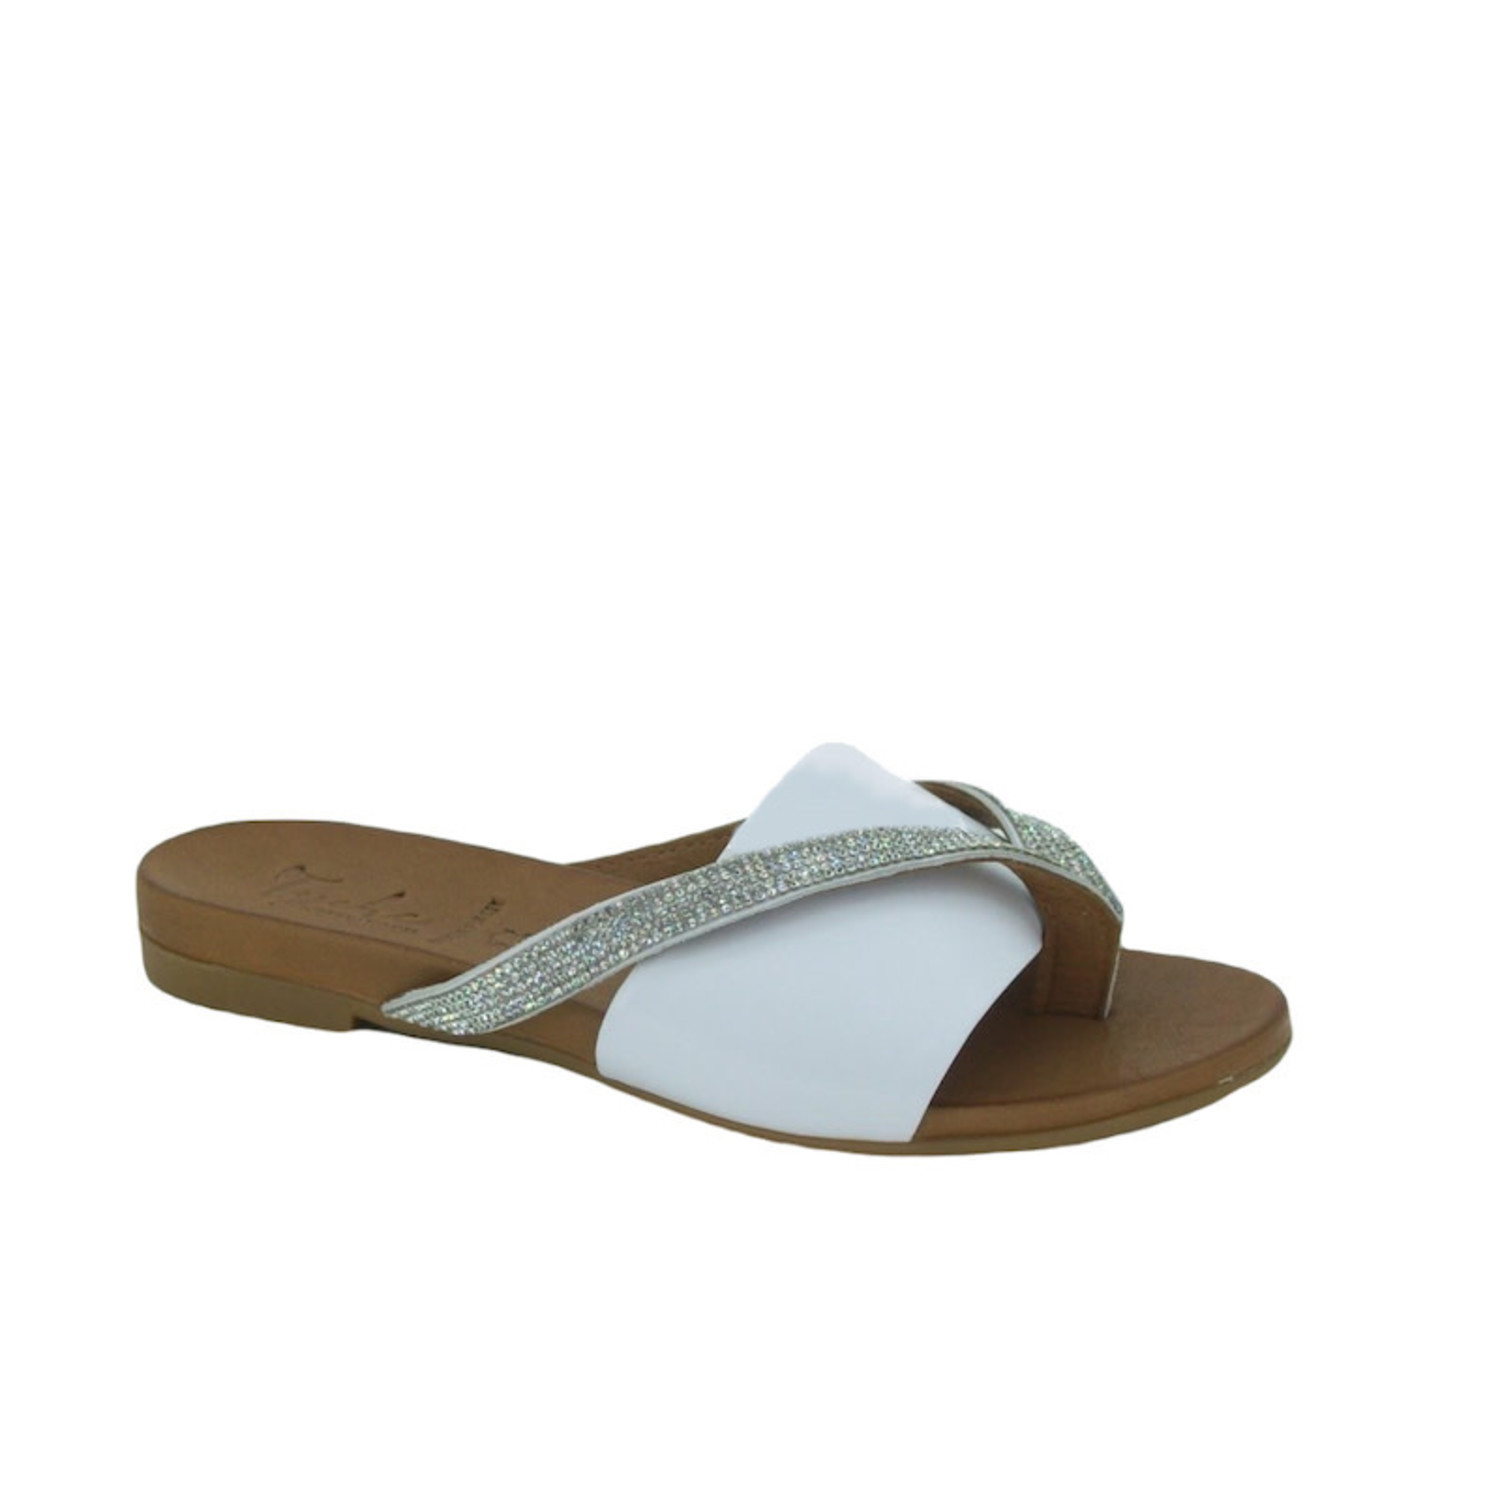 Letty Flip Flop - Womens Sandals | Tyche - Sand'n'Sea Boutique